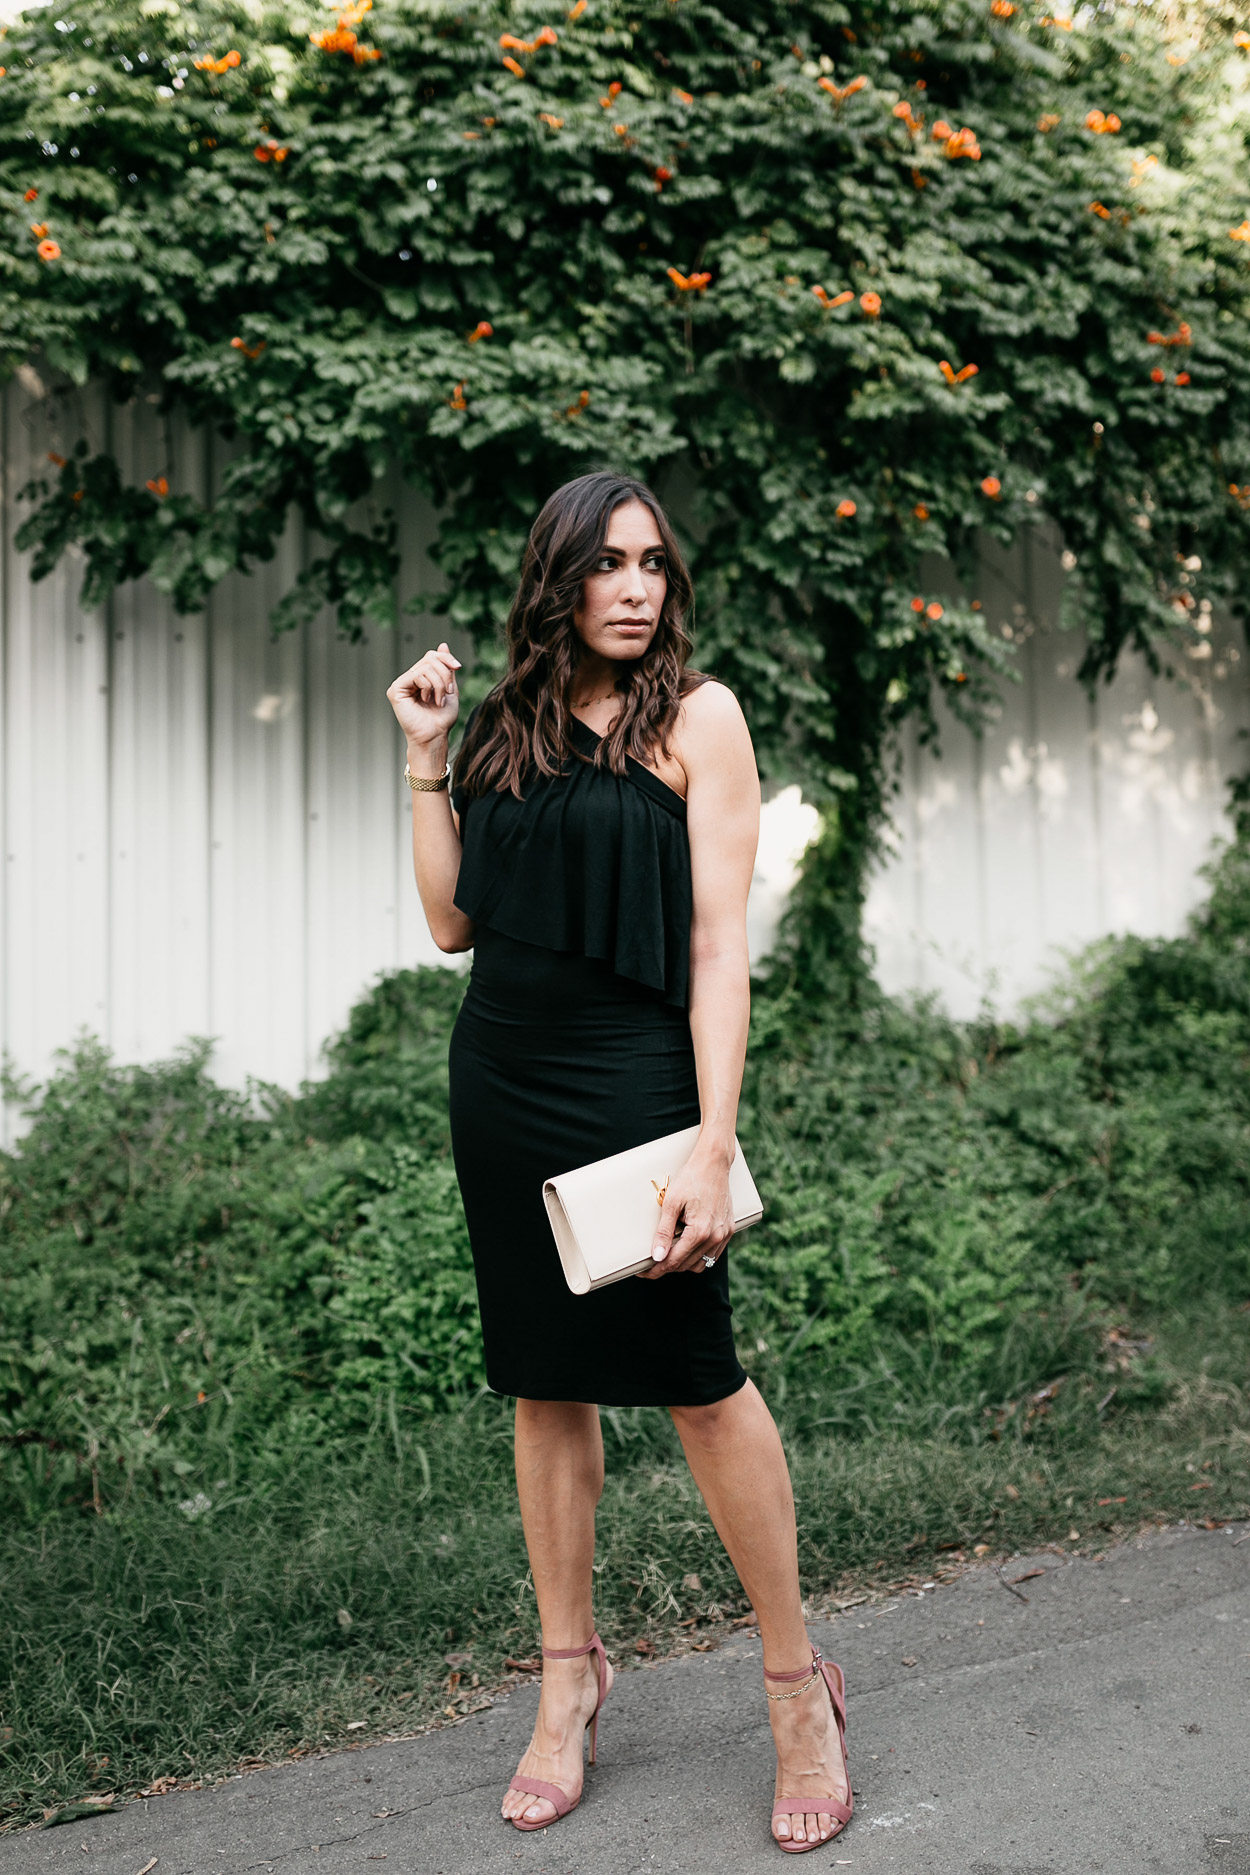 Wear a black ruffle dress like this one by Three Dots for easy date night style as shown by South Floida fashion blogger Amanda of A Glam Lifestyle, paired with Steve Madden mauve sandals and YSL monogram clutch